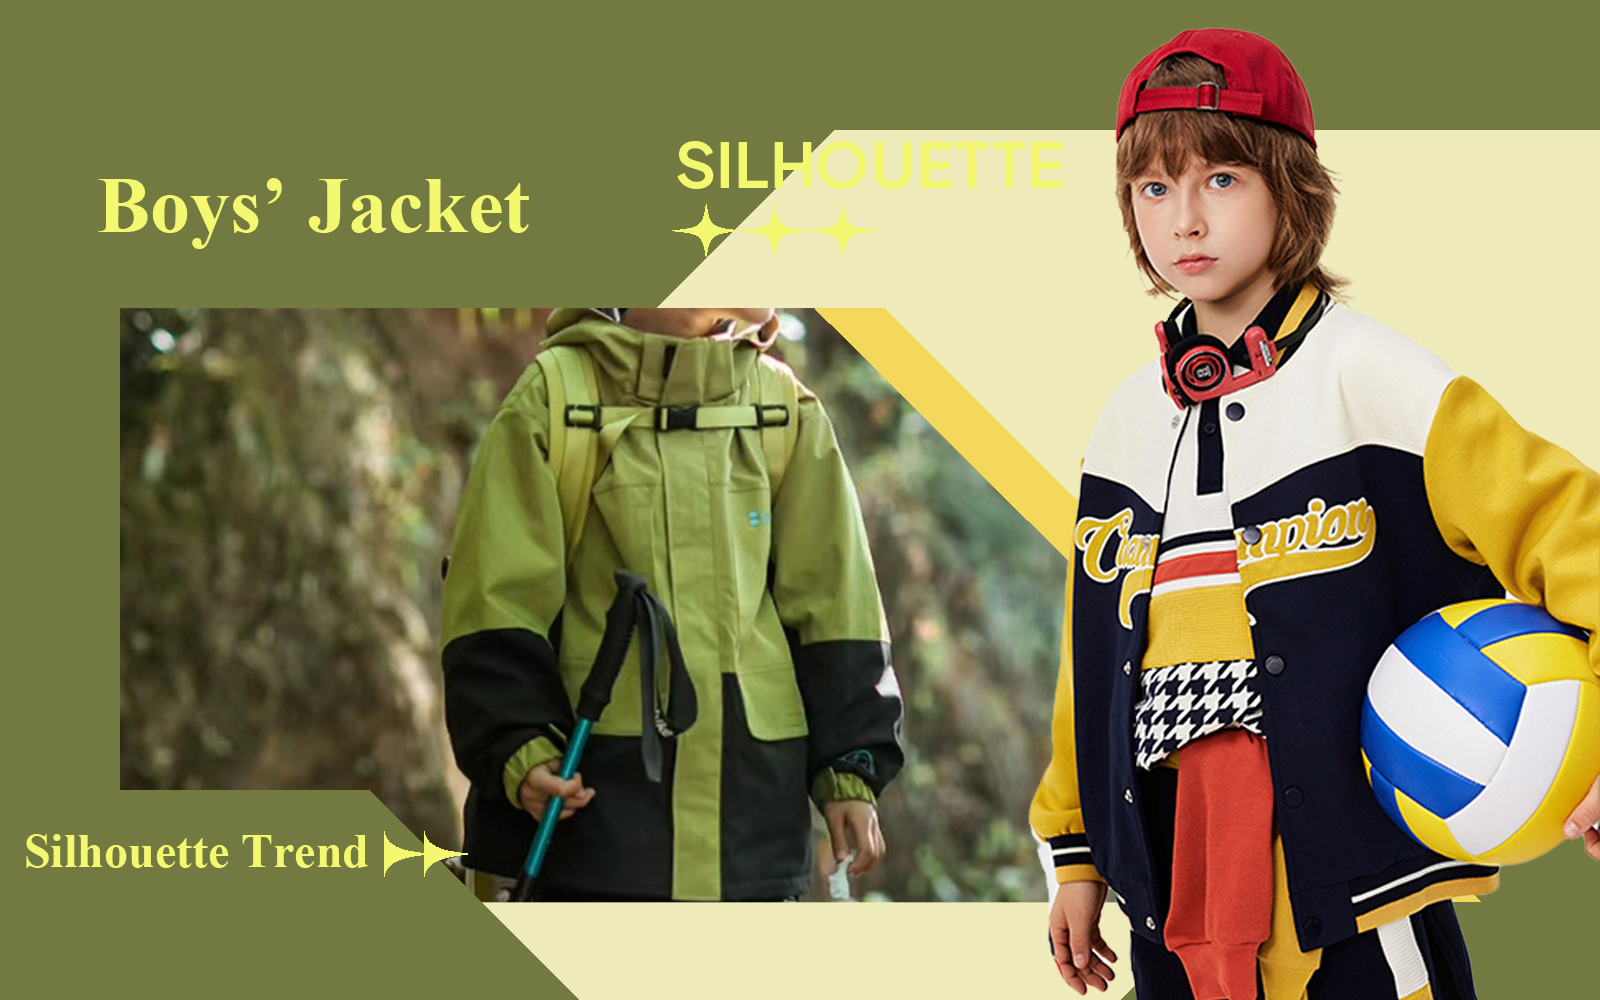 A/W 24/25 Silhouette Trend for Boys' Jacket